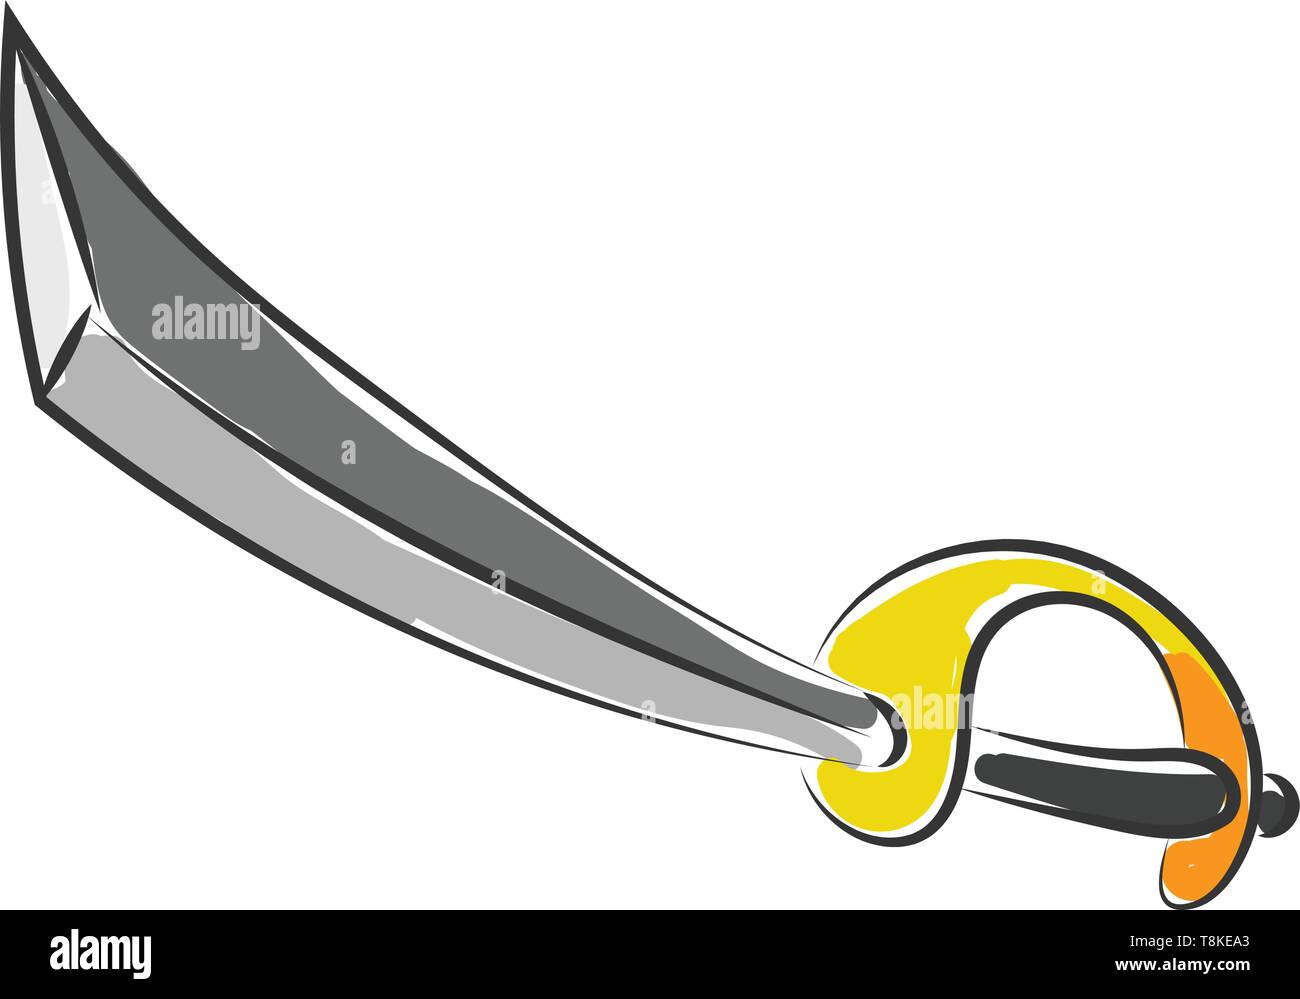 Painting of the sword with a long metal blade and a yellow handguard used to administer various physical punishments., vector, color drawing or illust Stock Vector